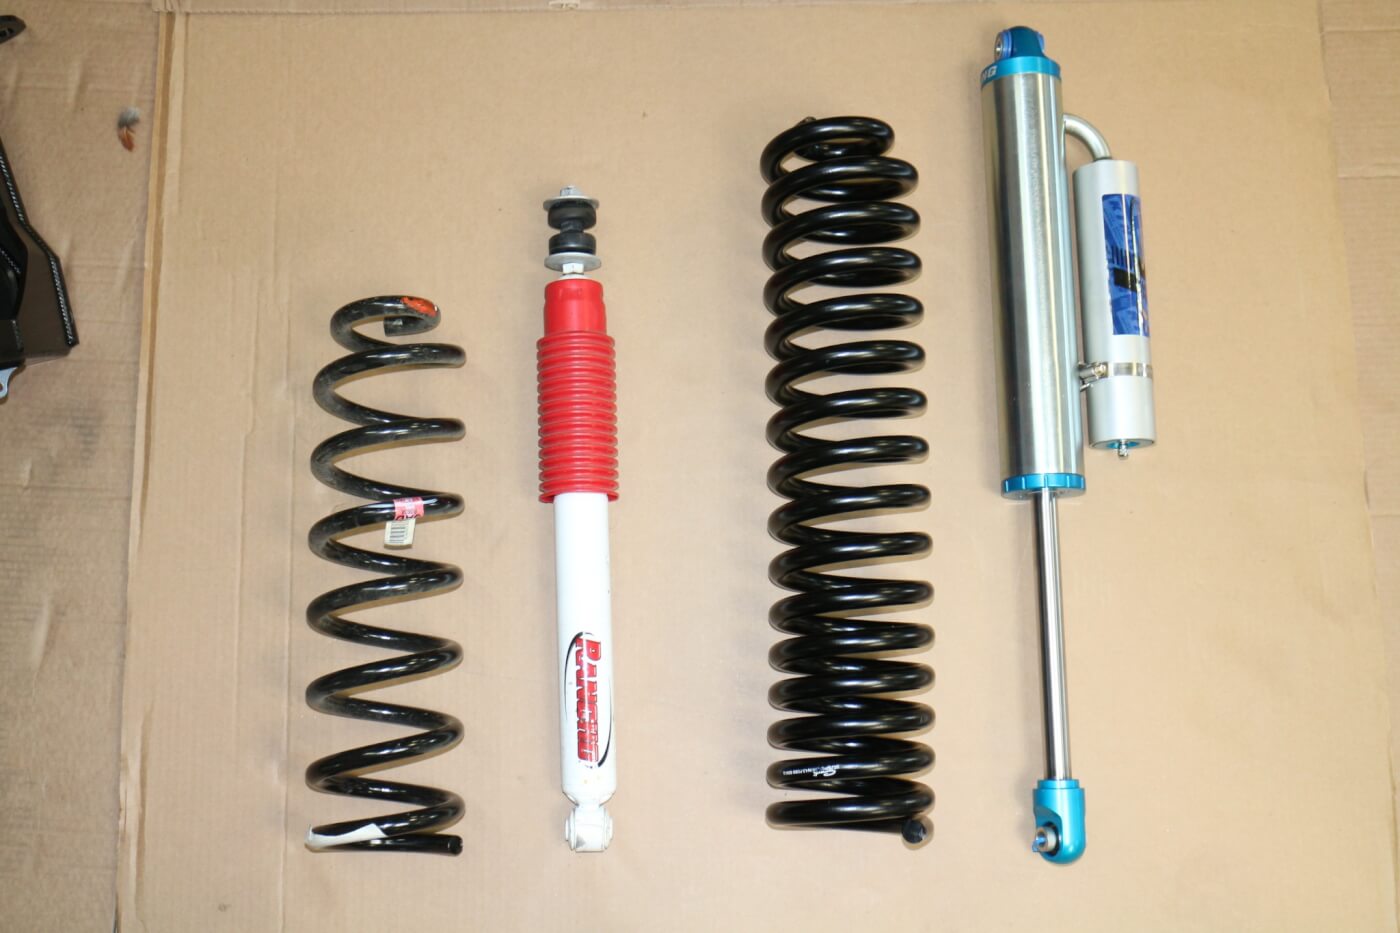 4. The OEM front spring and shock (L) are seen here, compared to the longer Carli springs and remote reservoir shocks. 